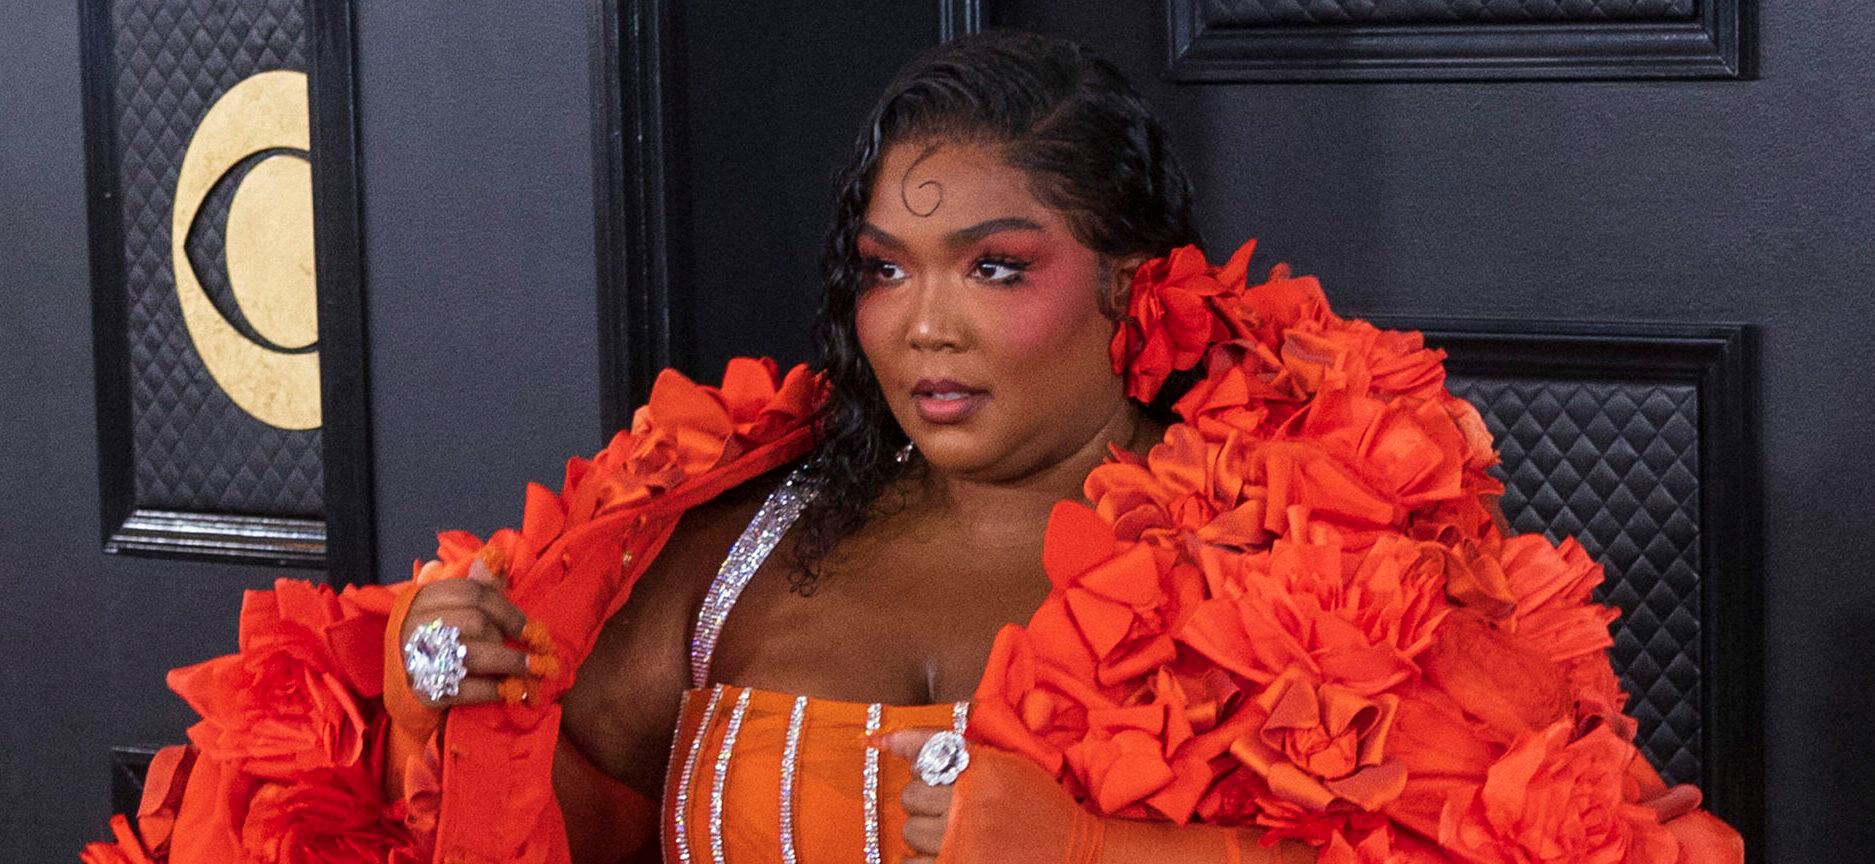 Lizzo’s Ex Dancers Tag Countersuit As ‘Attempt At Intimidation’